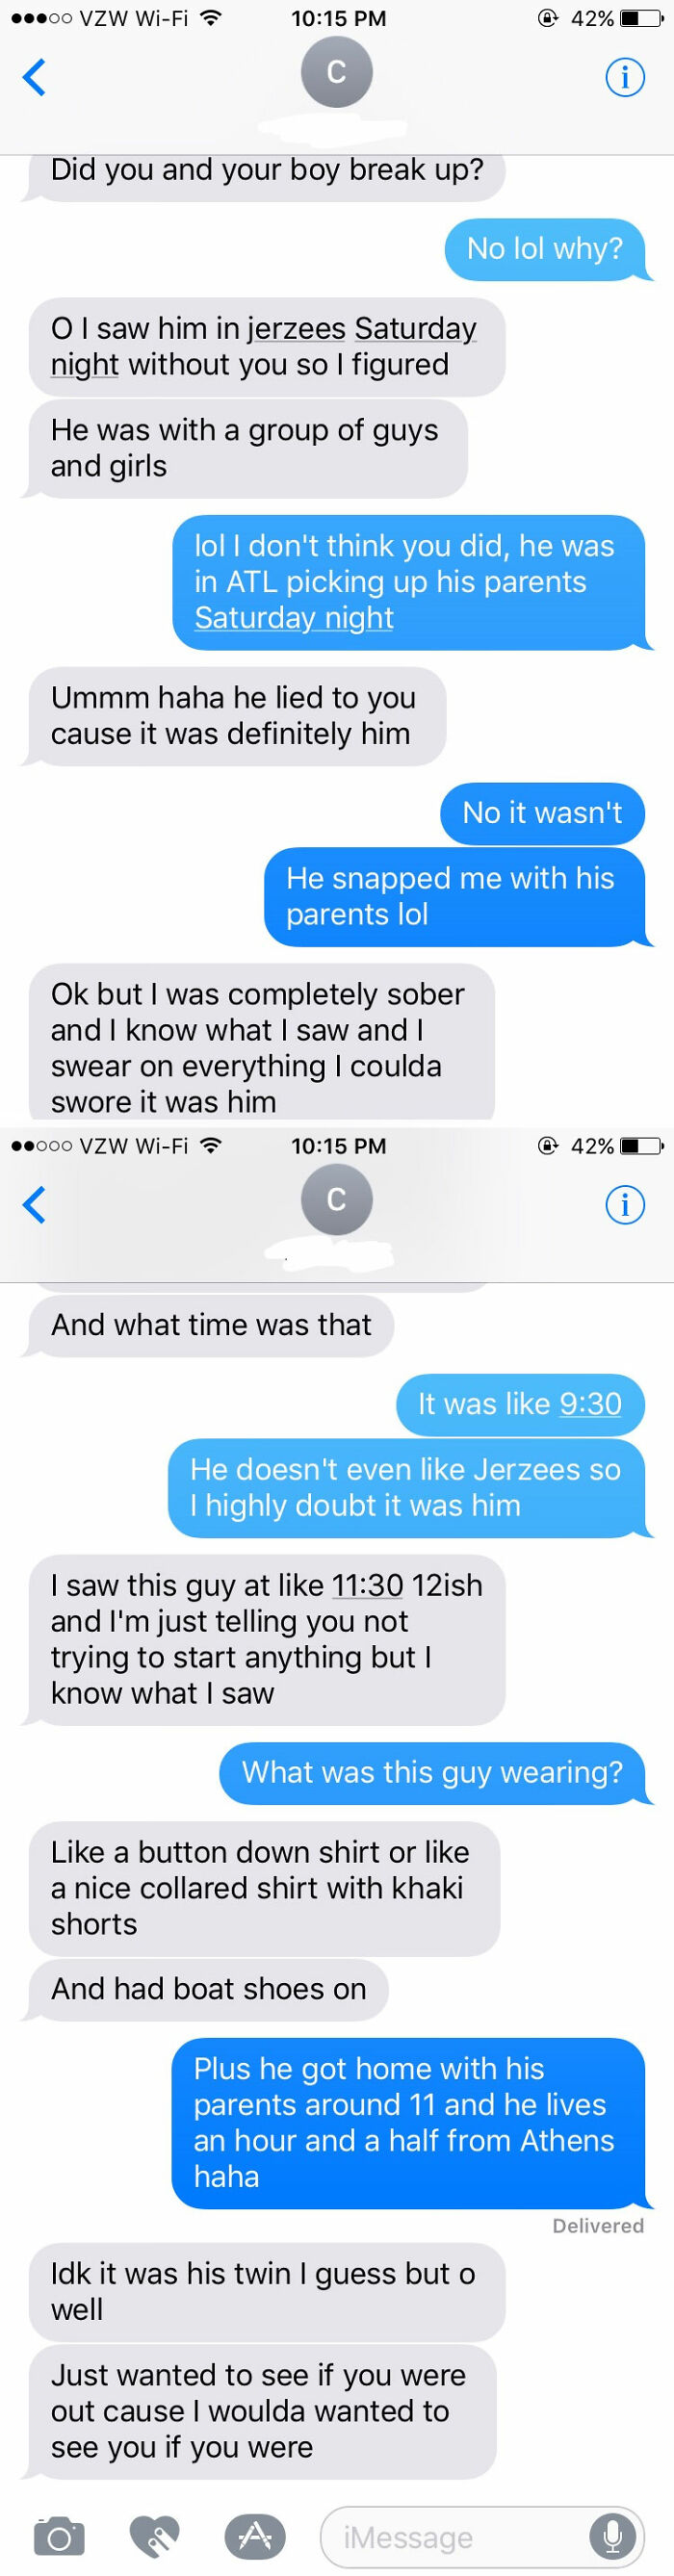 My Girlfriend Got These Texts Yesterday From A Guy She Used To See. He Apparently Is Really Good At Recognizing Me Even Though I've Never Seen Him In My Life